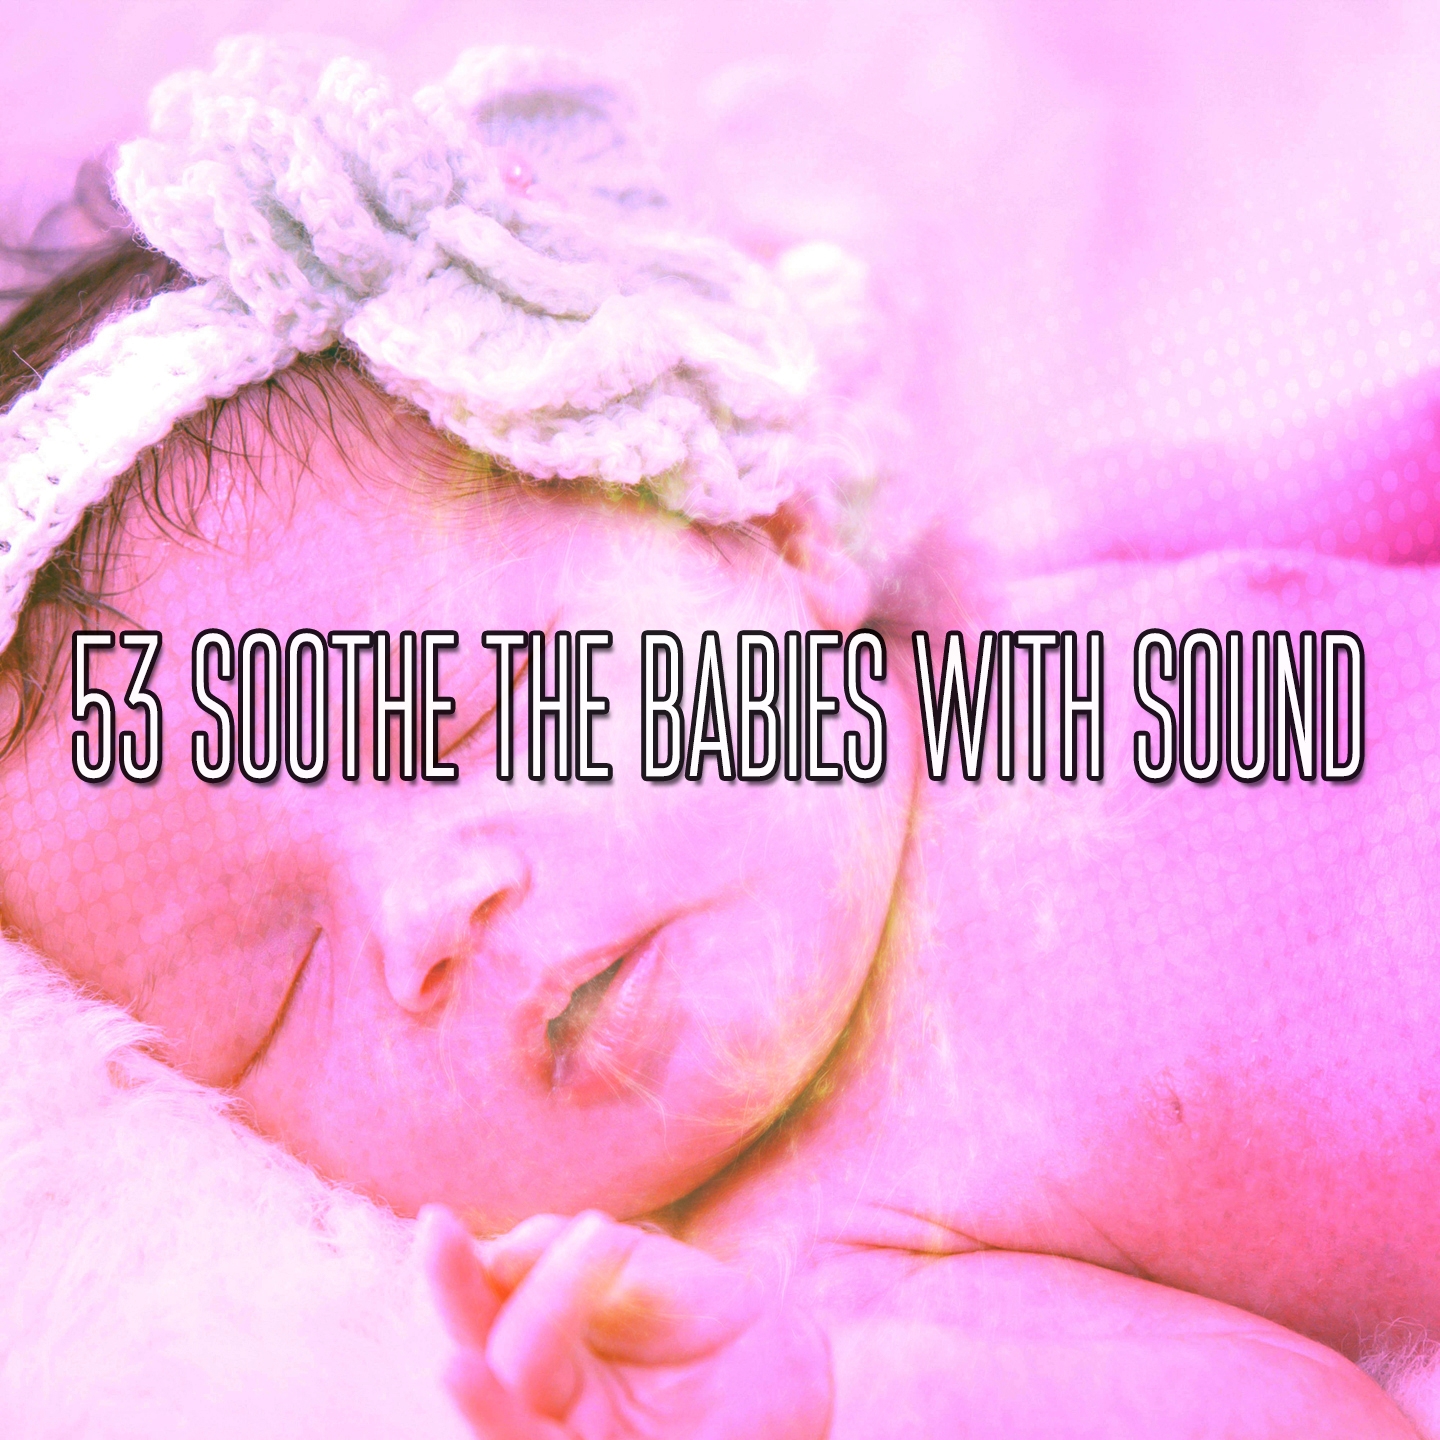 53 Soothe The Babies With Sound